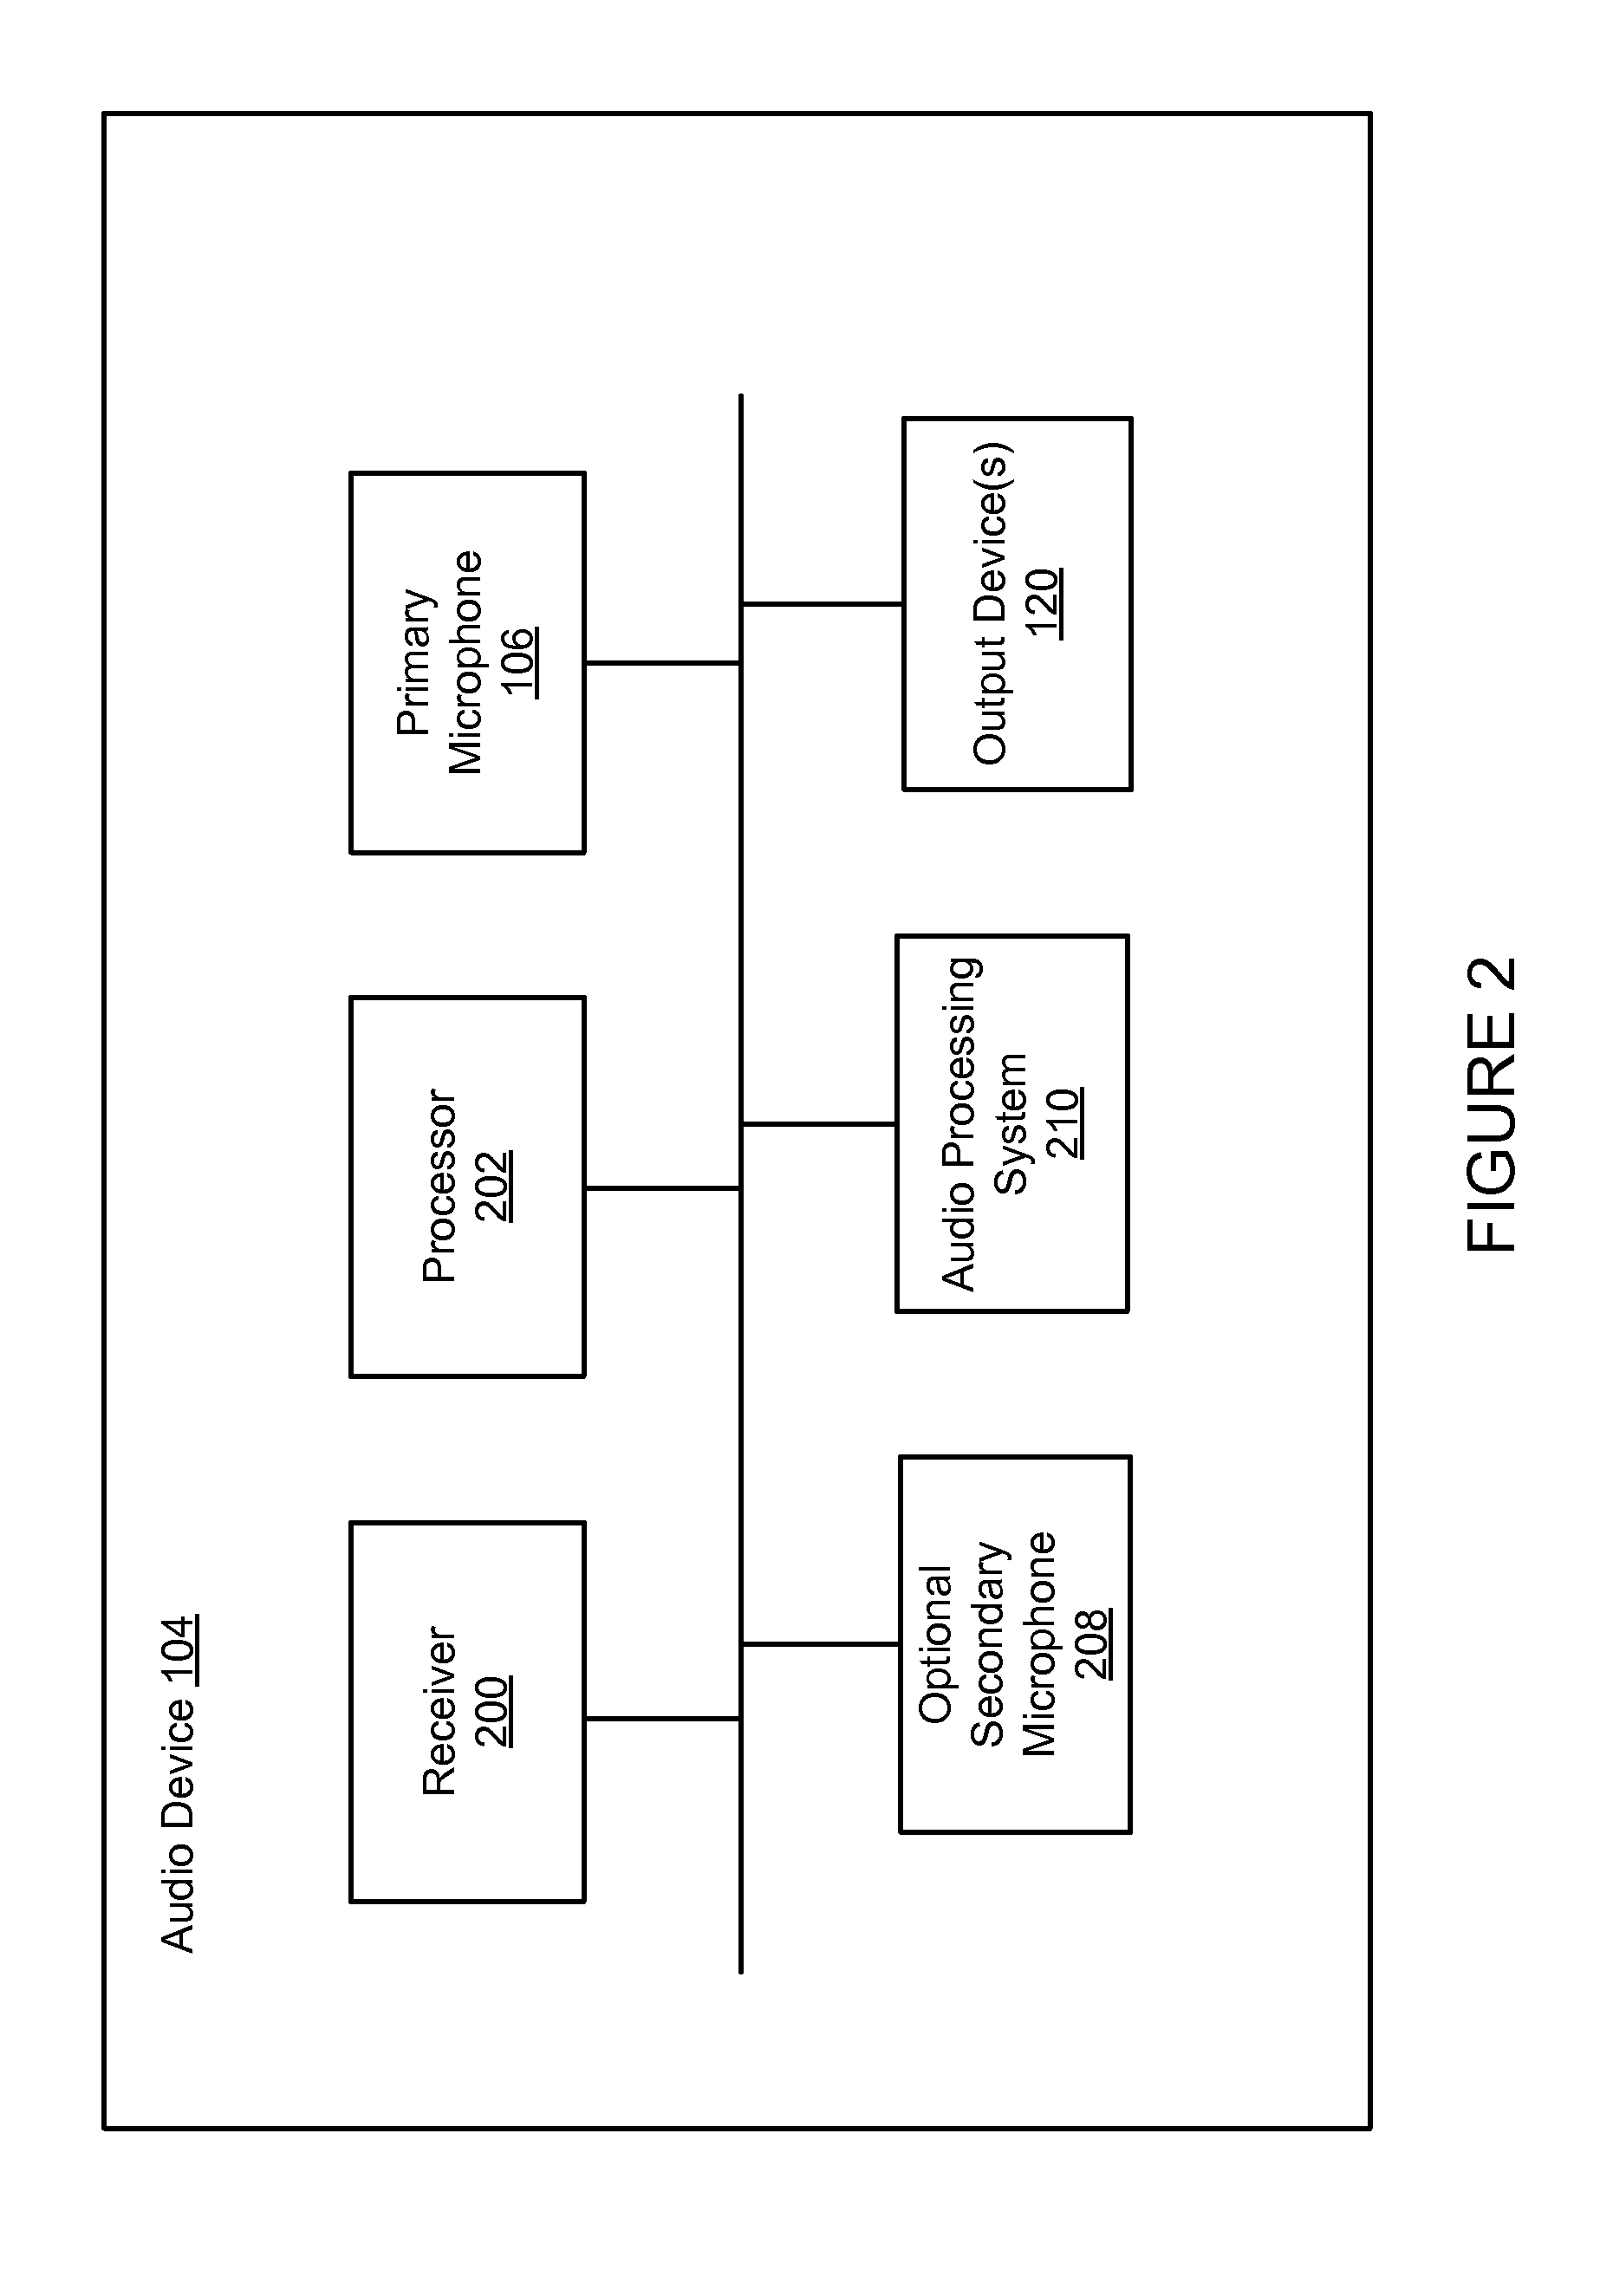 Bandwidth enhancement of speech signals assisted by noise reduction